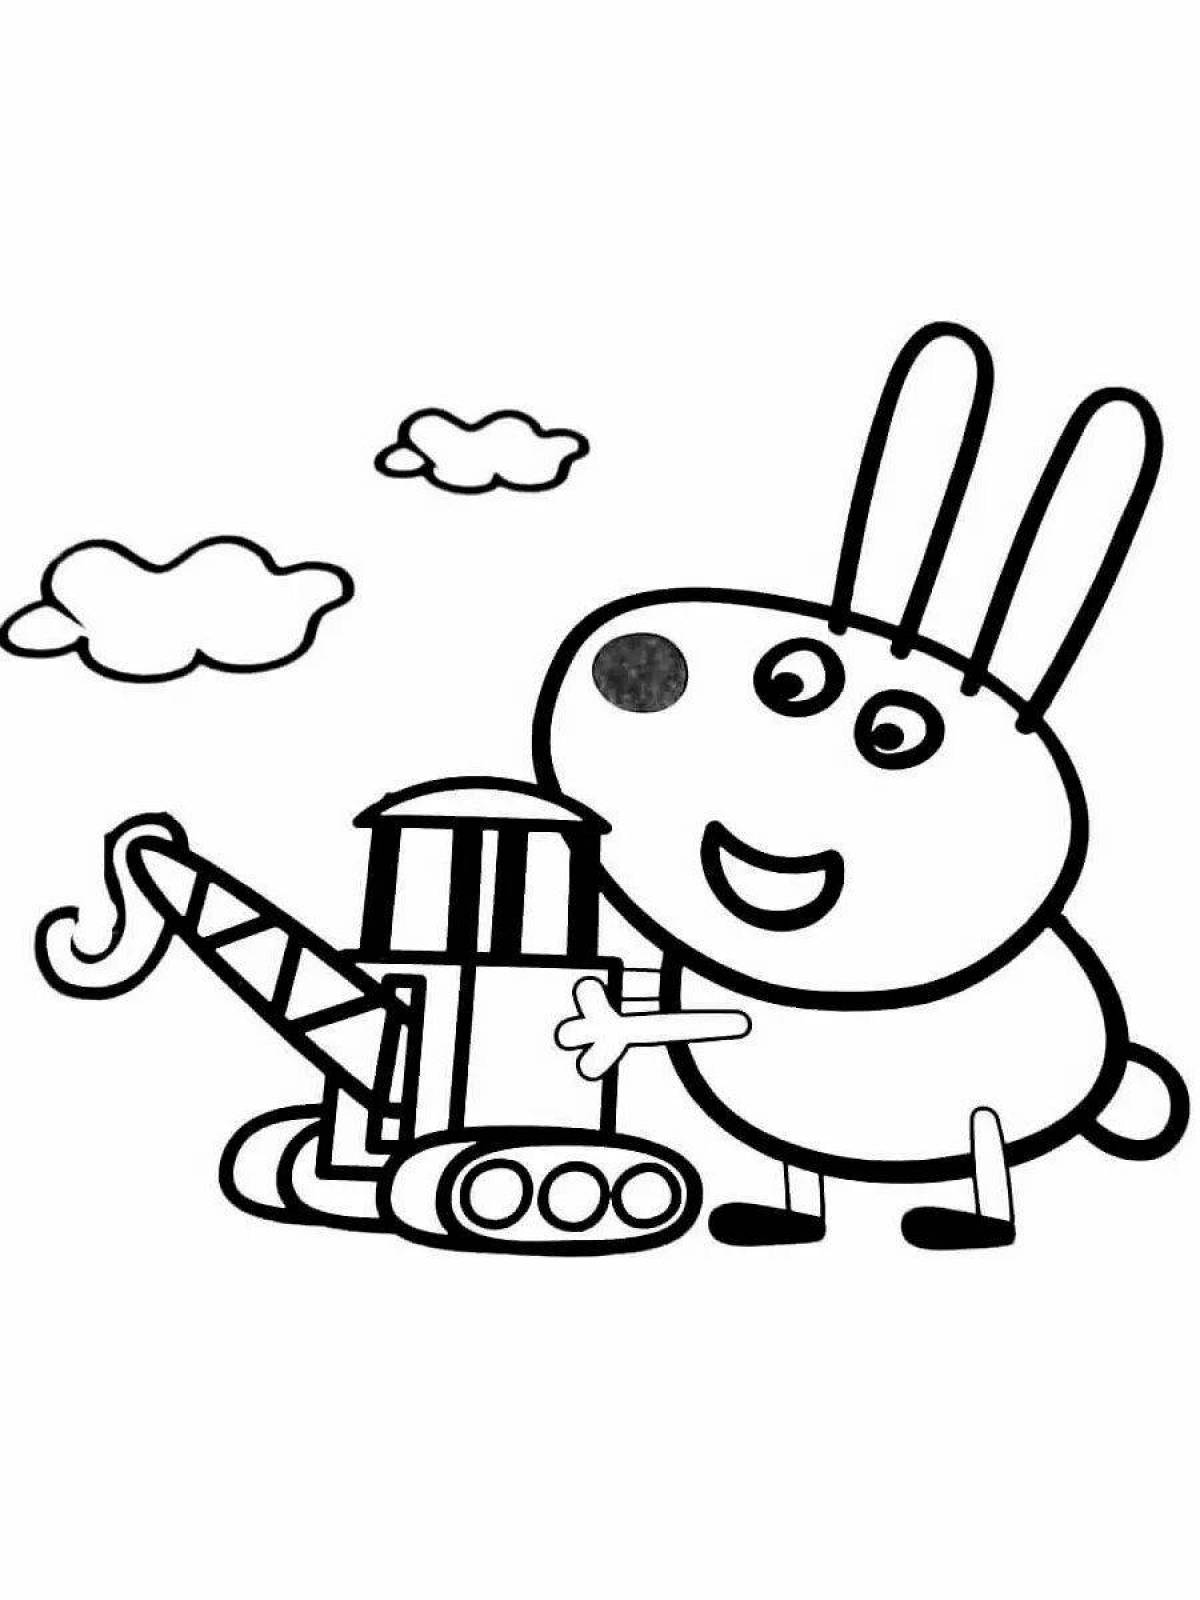 Peppa Pig coloring page for kids